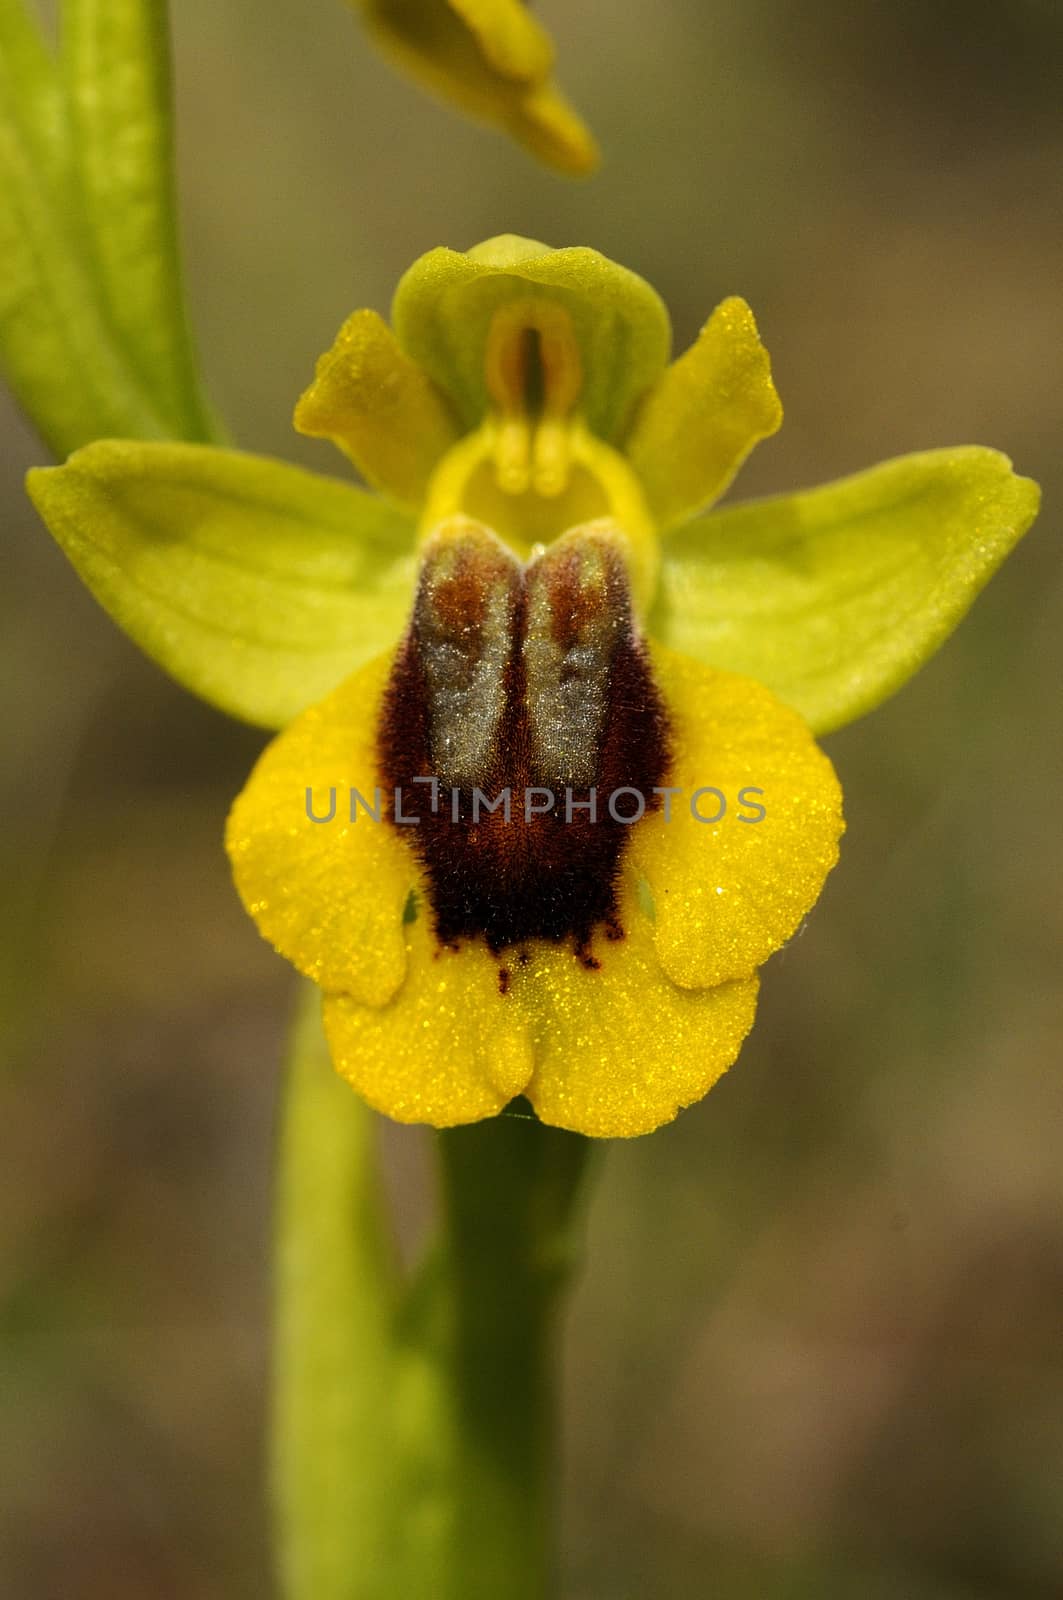 Wild orchid called Yellow Ophrys (Ophrys lutea)  by jalonsohu@gmail.com